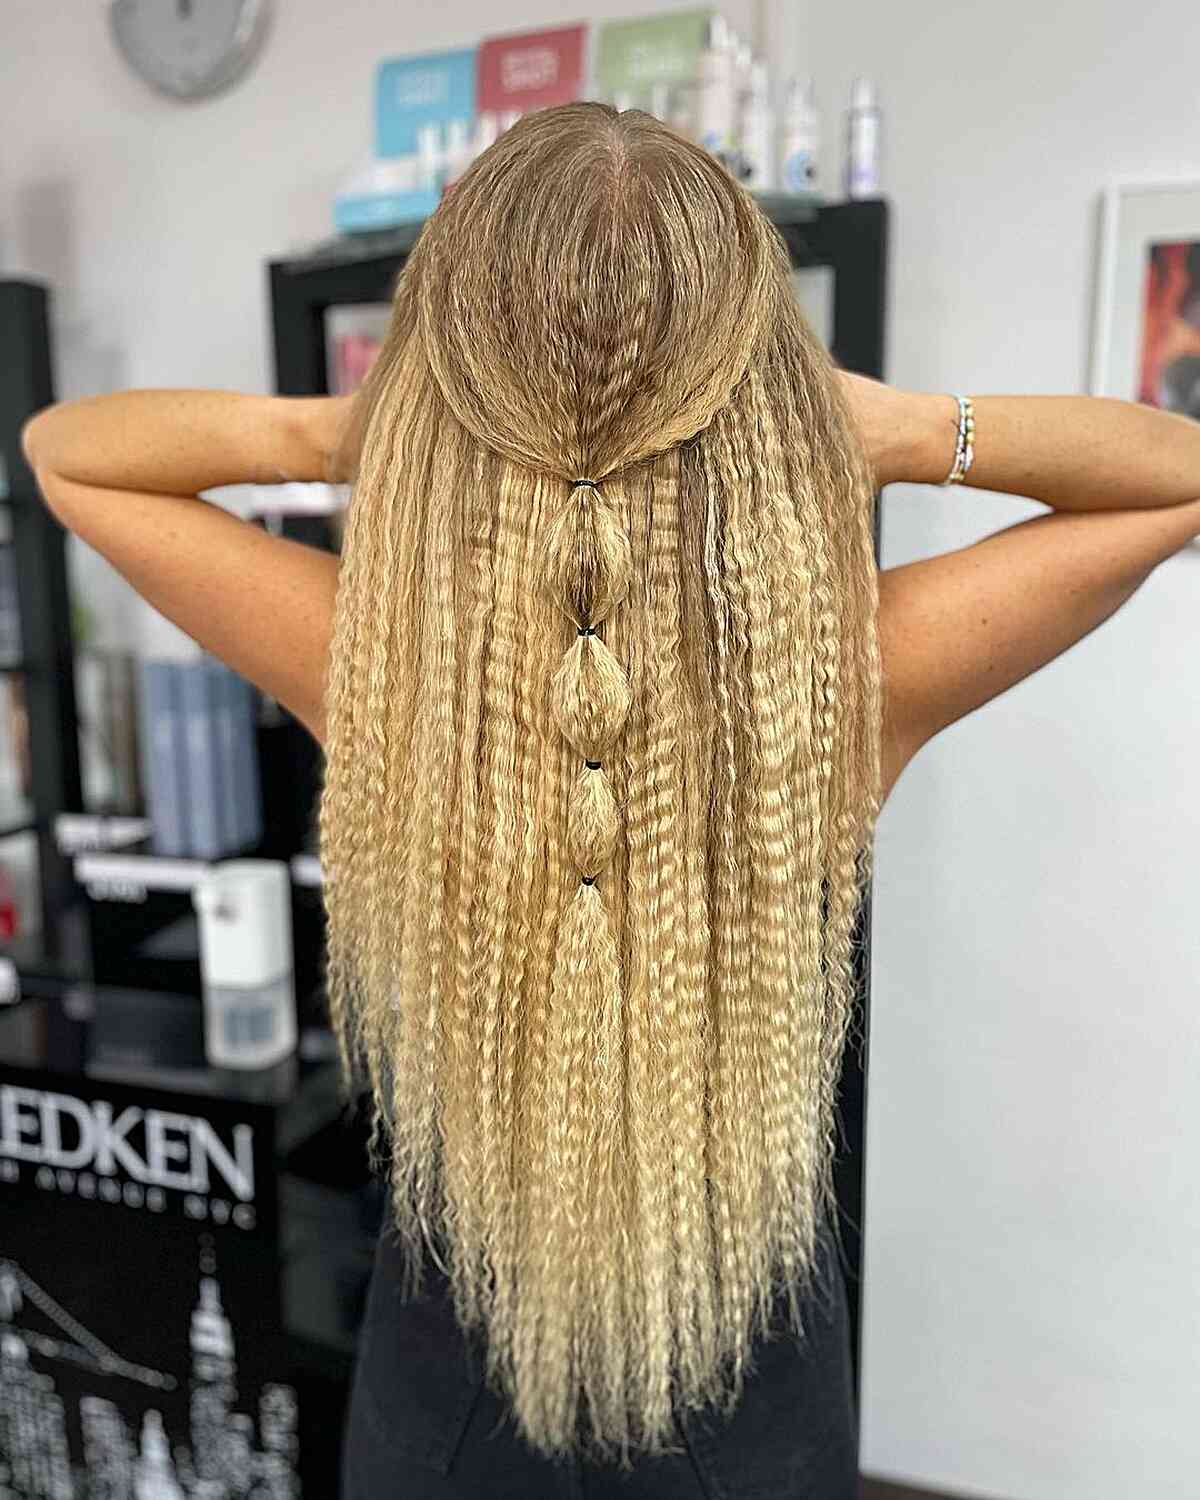 Long Half-Up Crimped Hair for Festivals and Parties